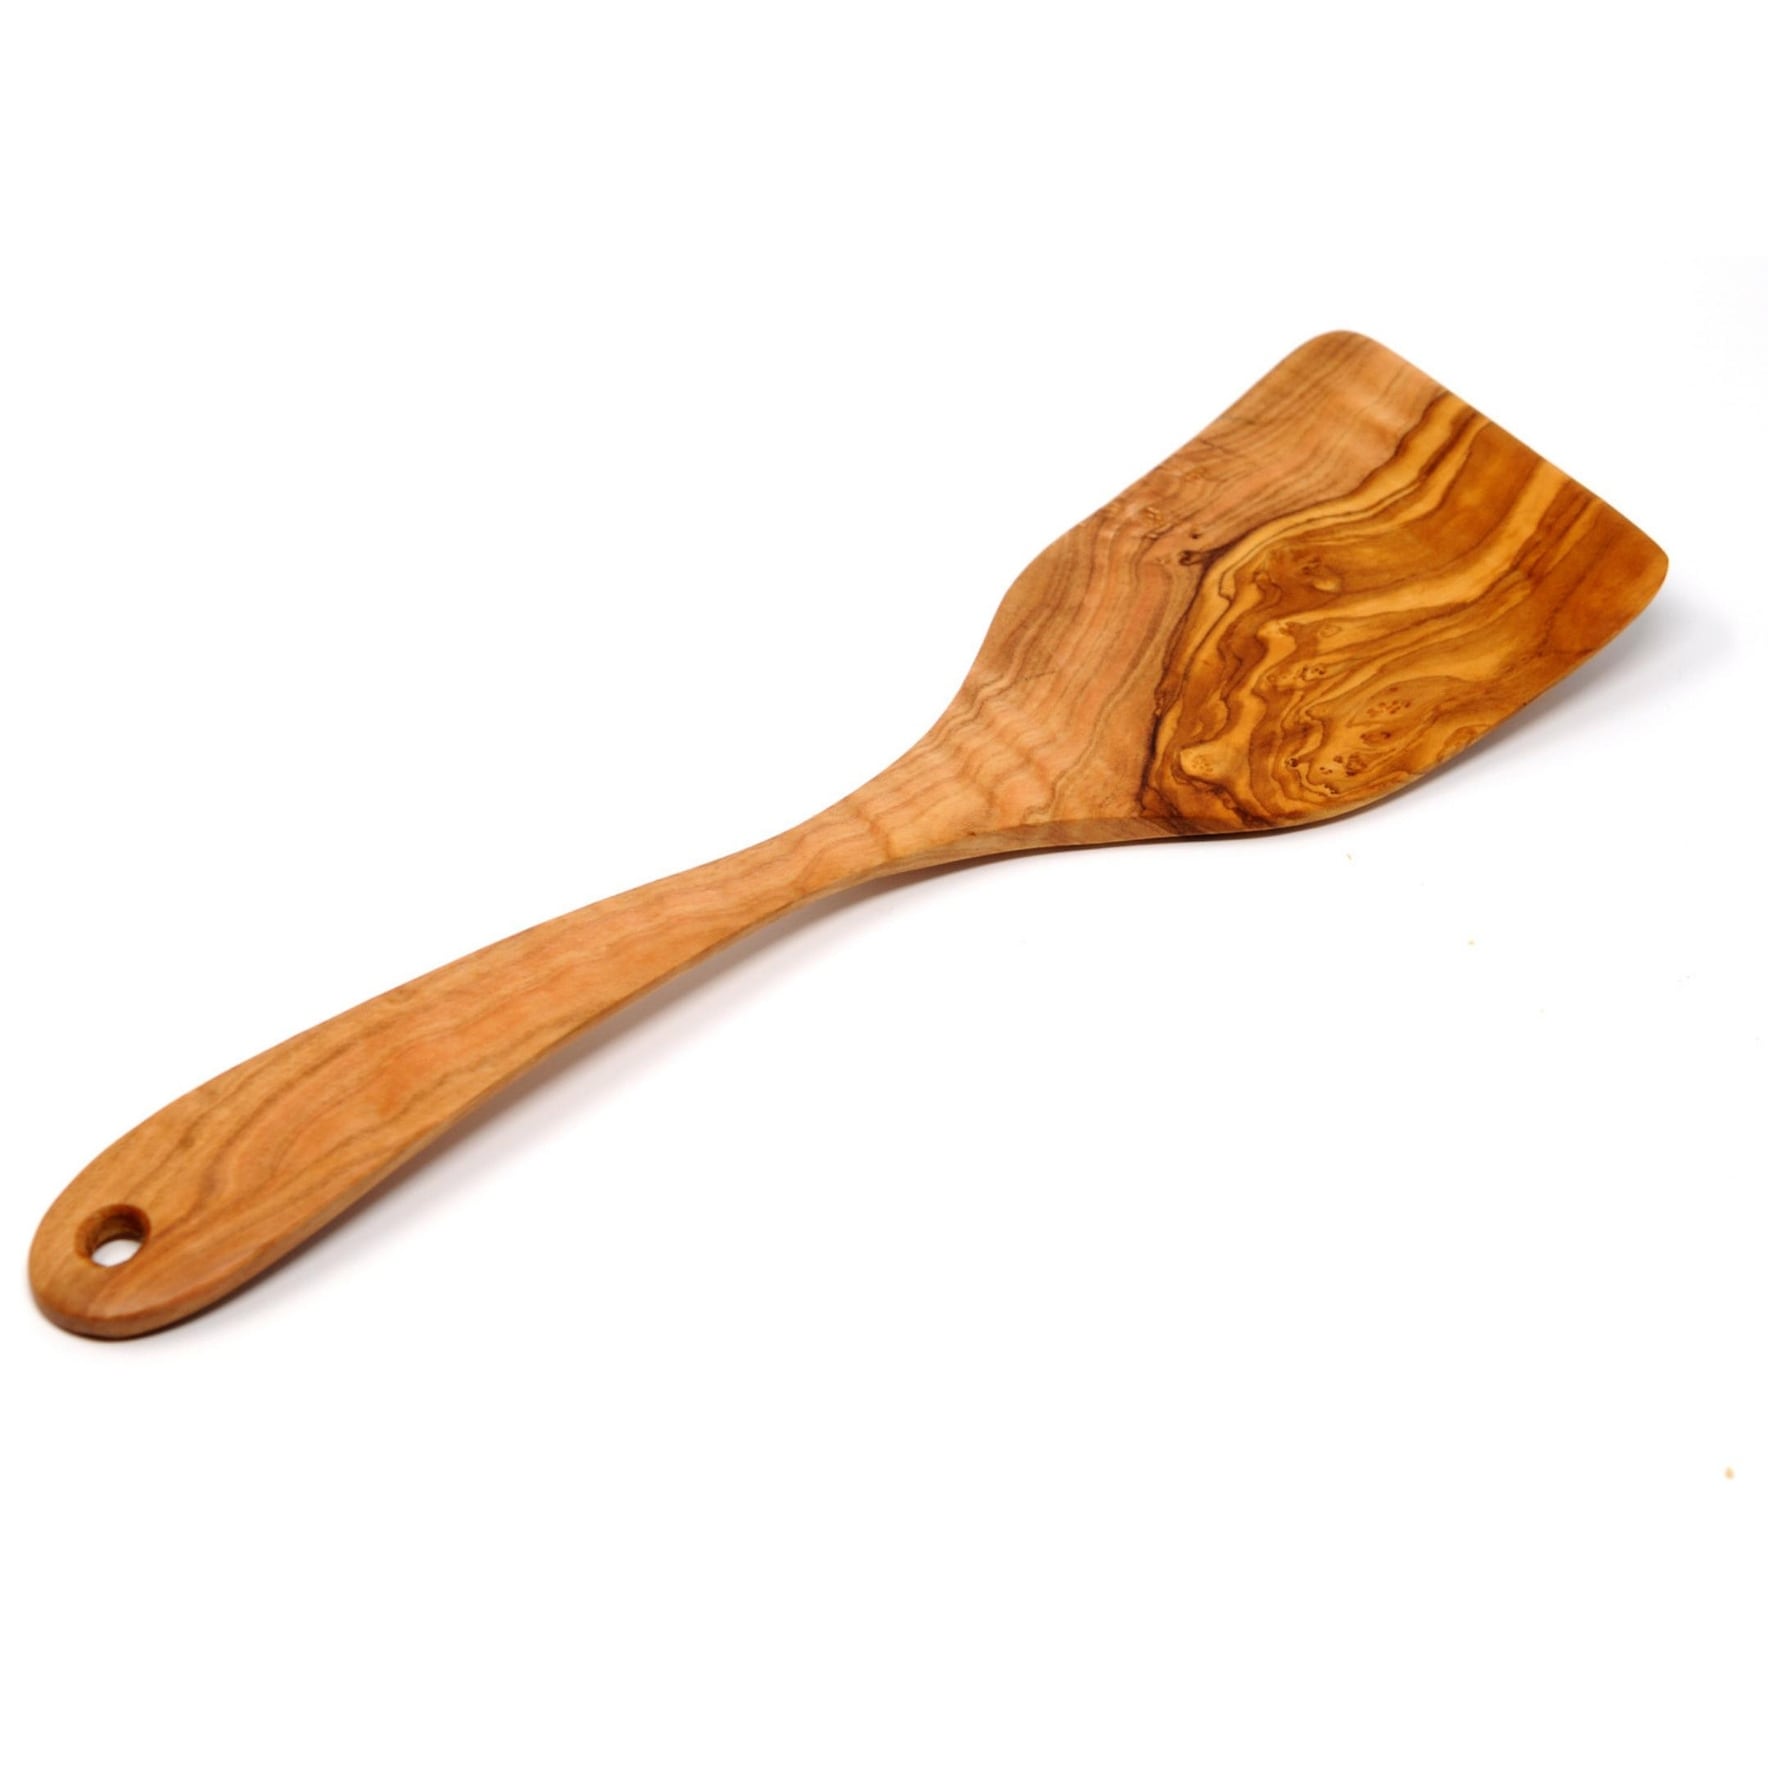 https://ak1.ostkcdn.com/images/products/is/images/direct/d341be9a4a8b83a66edf1c75709d8015d5e9a1b0/Wooden-Turning-Spatula-Olive-Wood-Pan-Paddle-Spatula.jpg